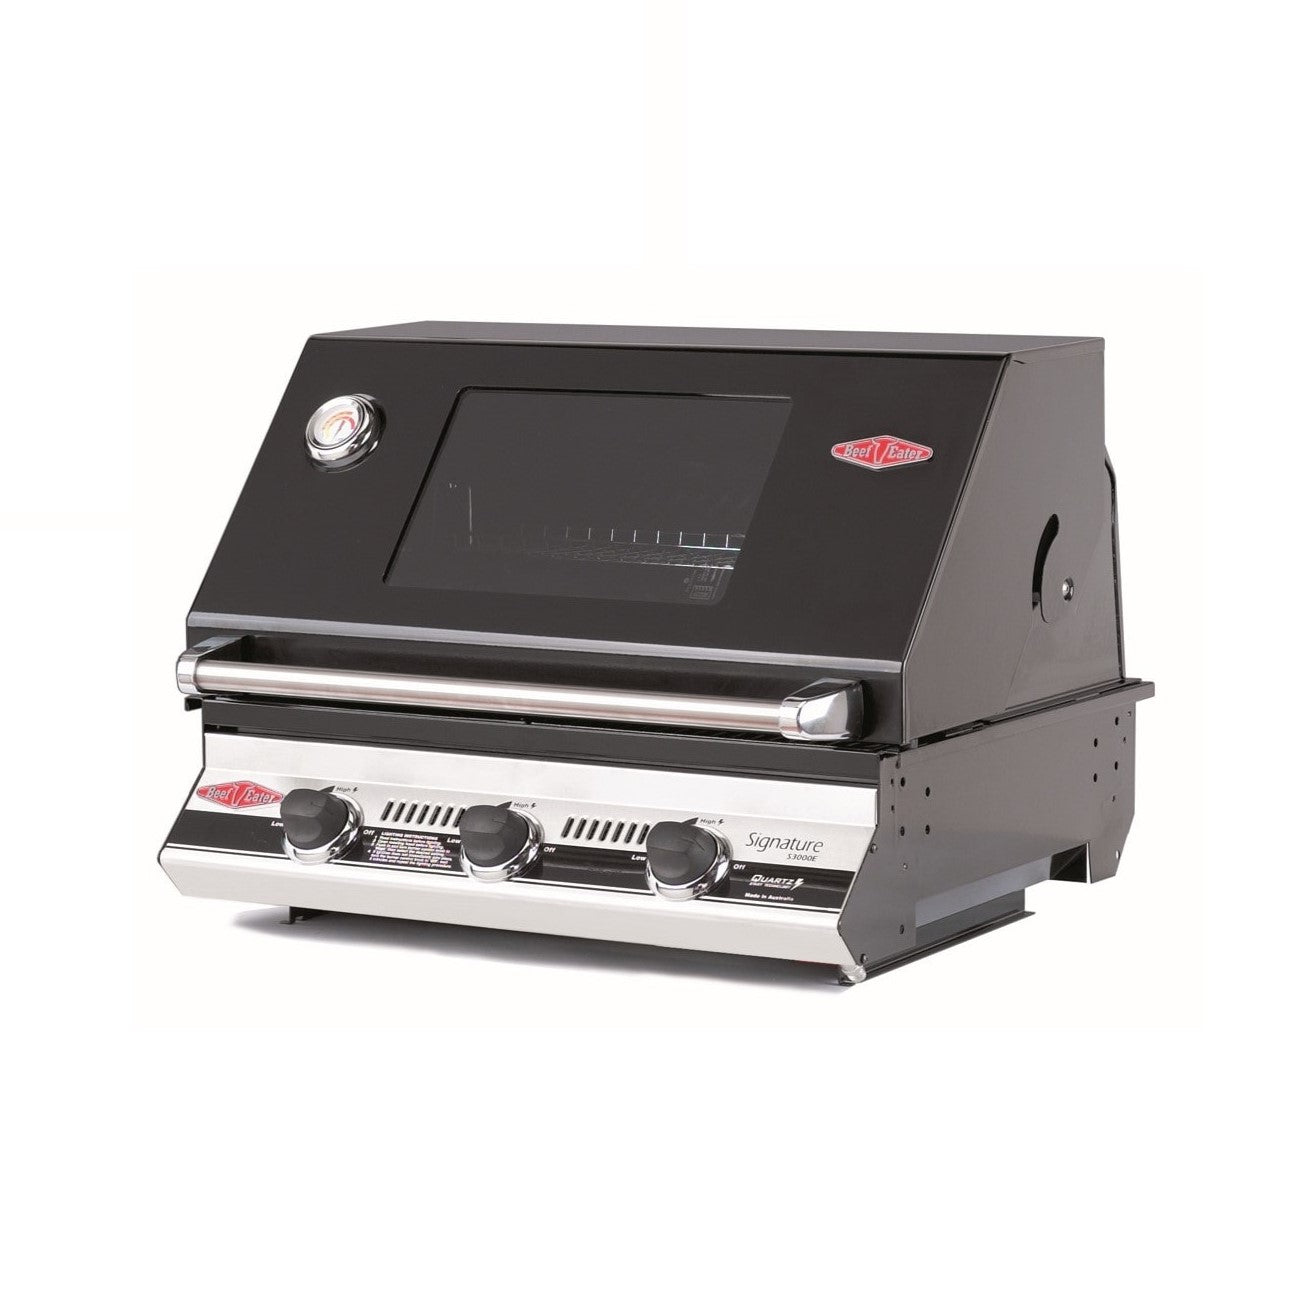 Beefeater Signature 3000E - Built in Gas BBQ Grill 3 Burner